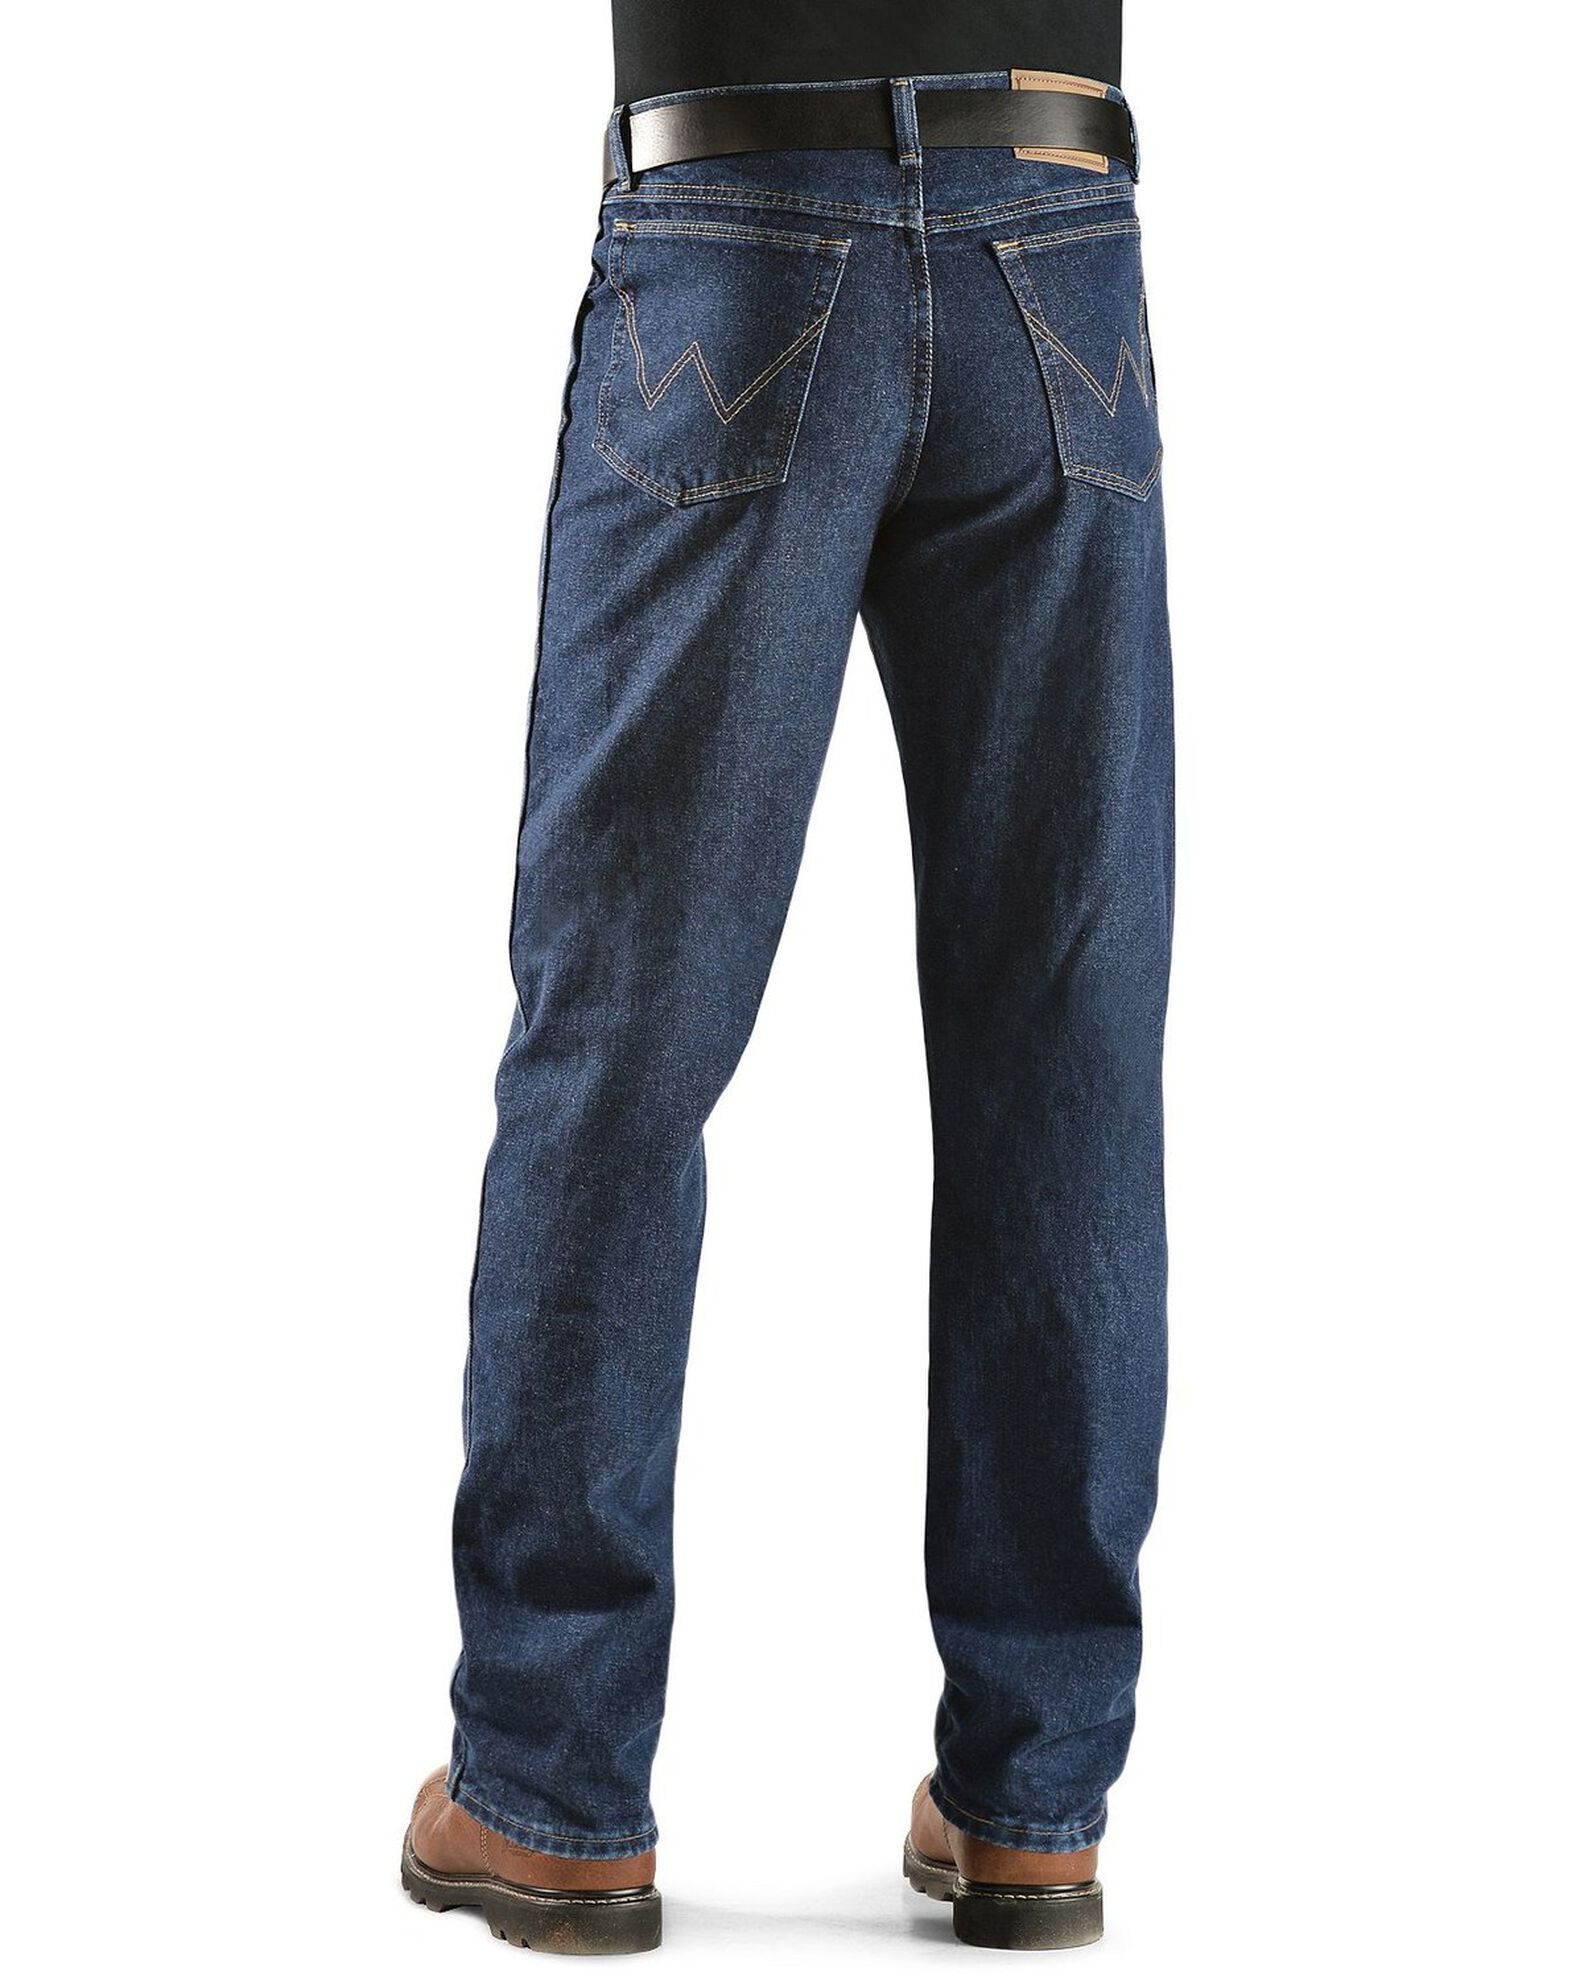 Wrangler Men's Rugged Wear Relaxed Fit Jeans | Boot Barn